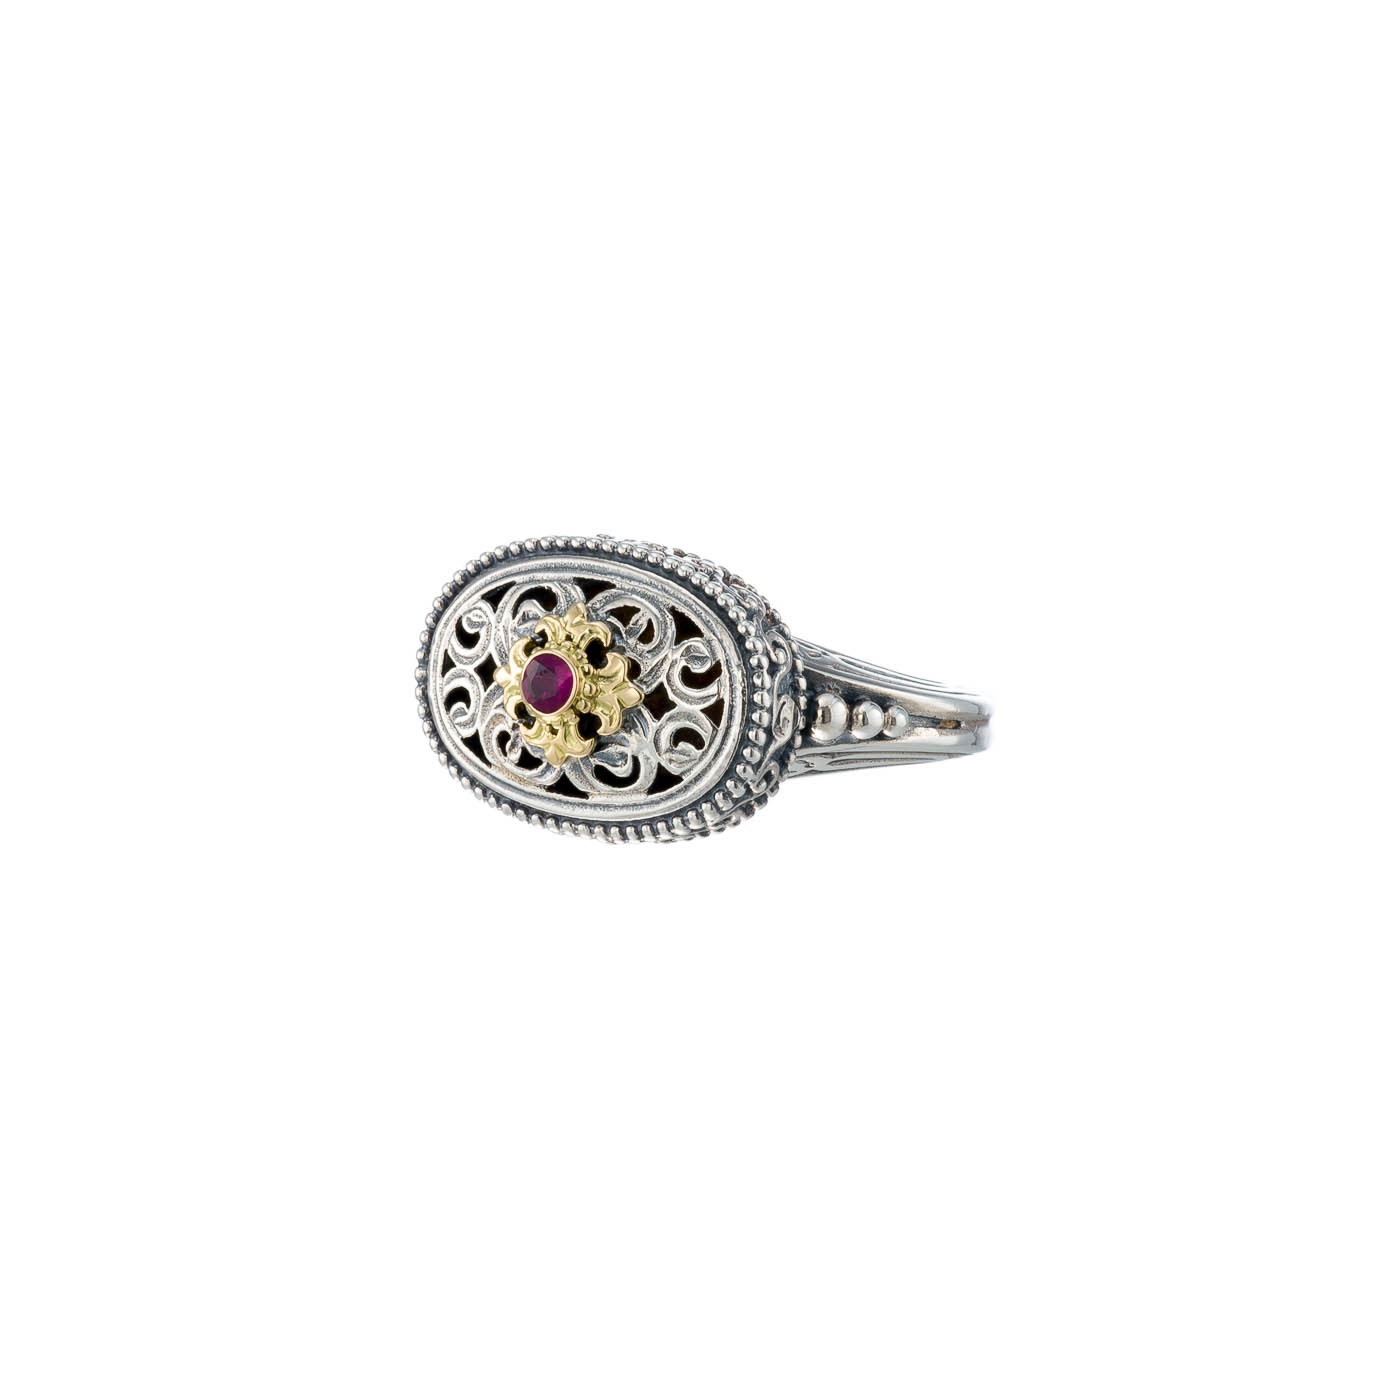 Garden shadows oval ring in 18K Gold and Sterling Silver with ruby